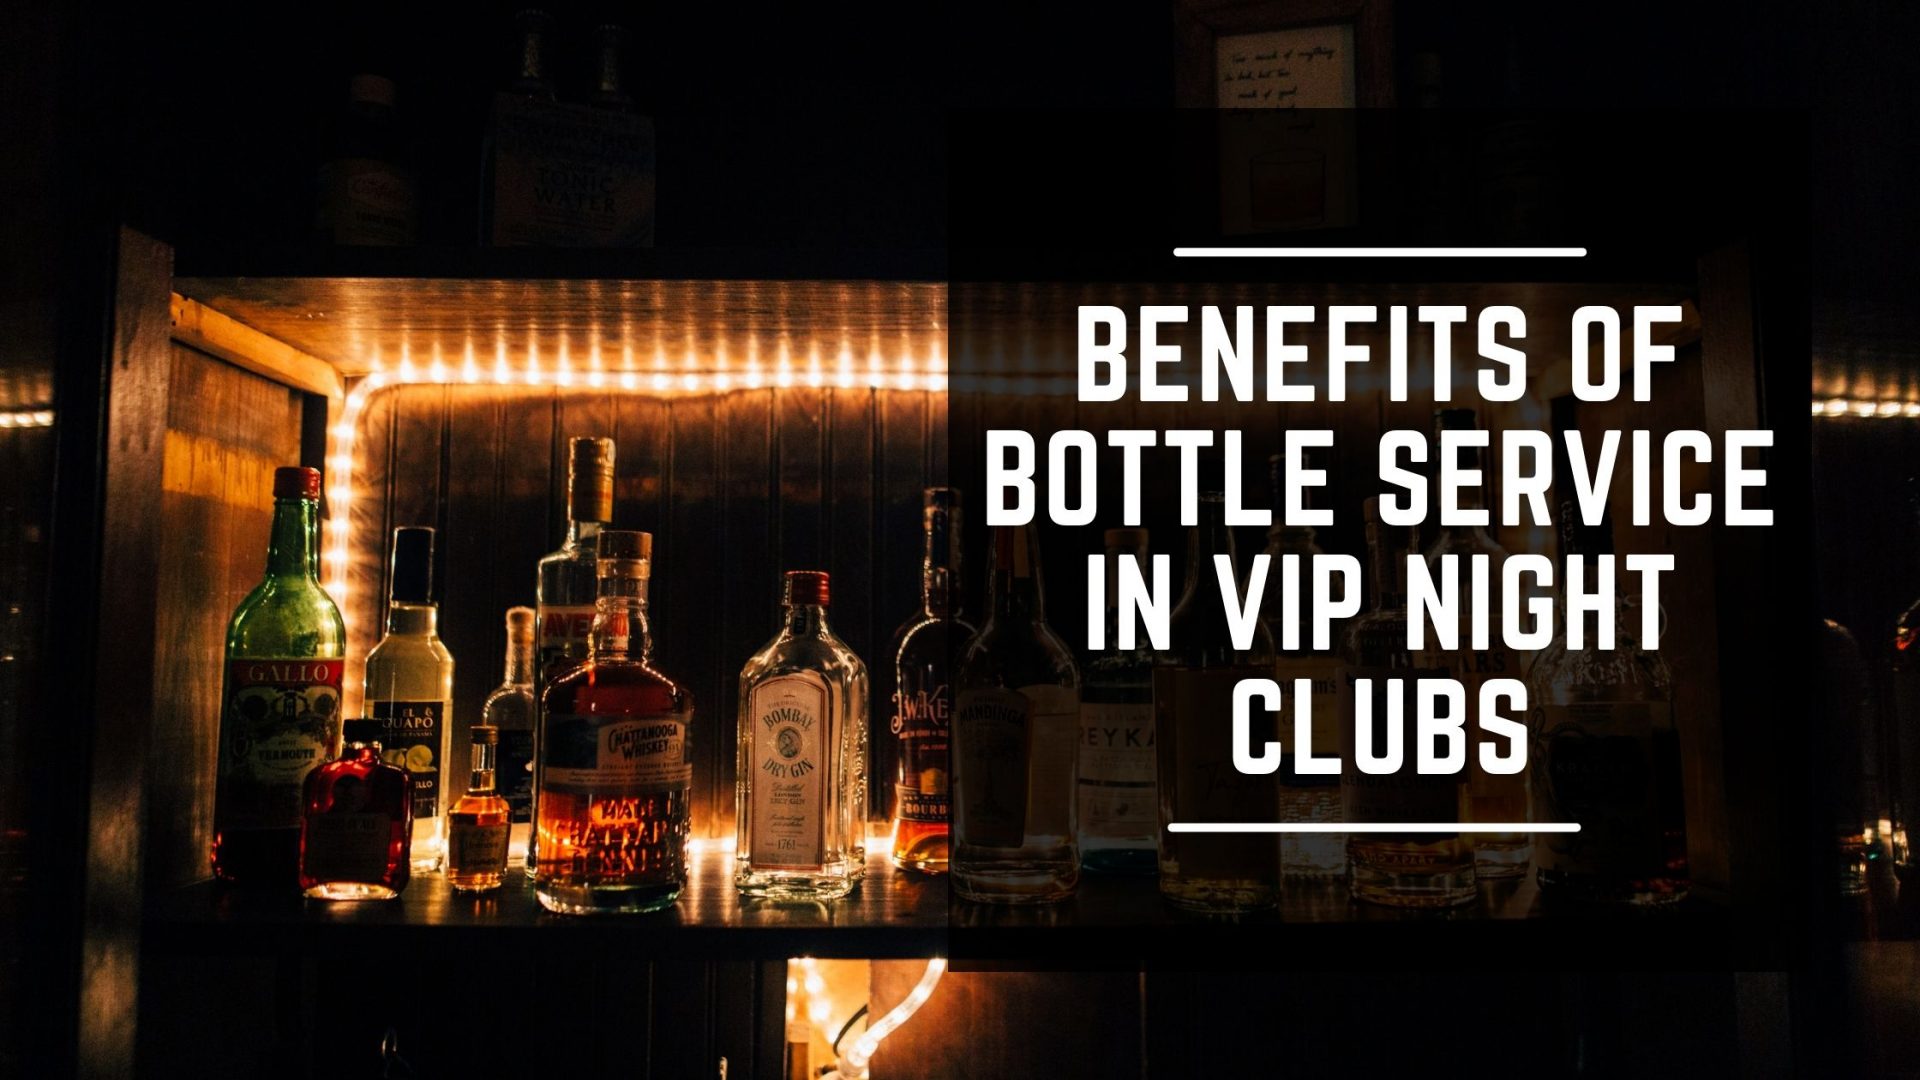 Benefits of Bottle Service in VIP Night clubs